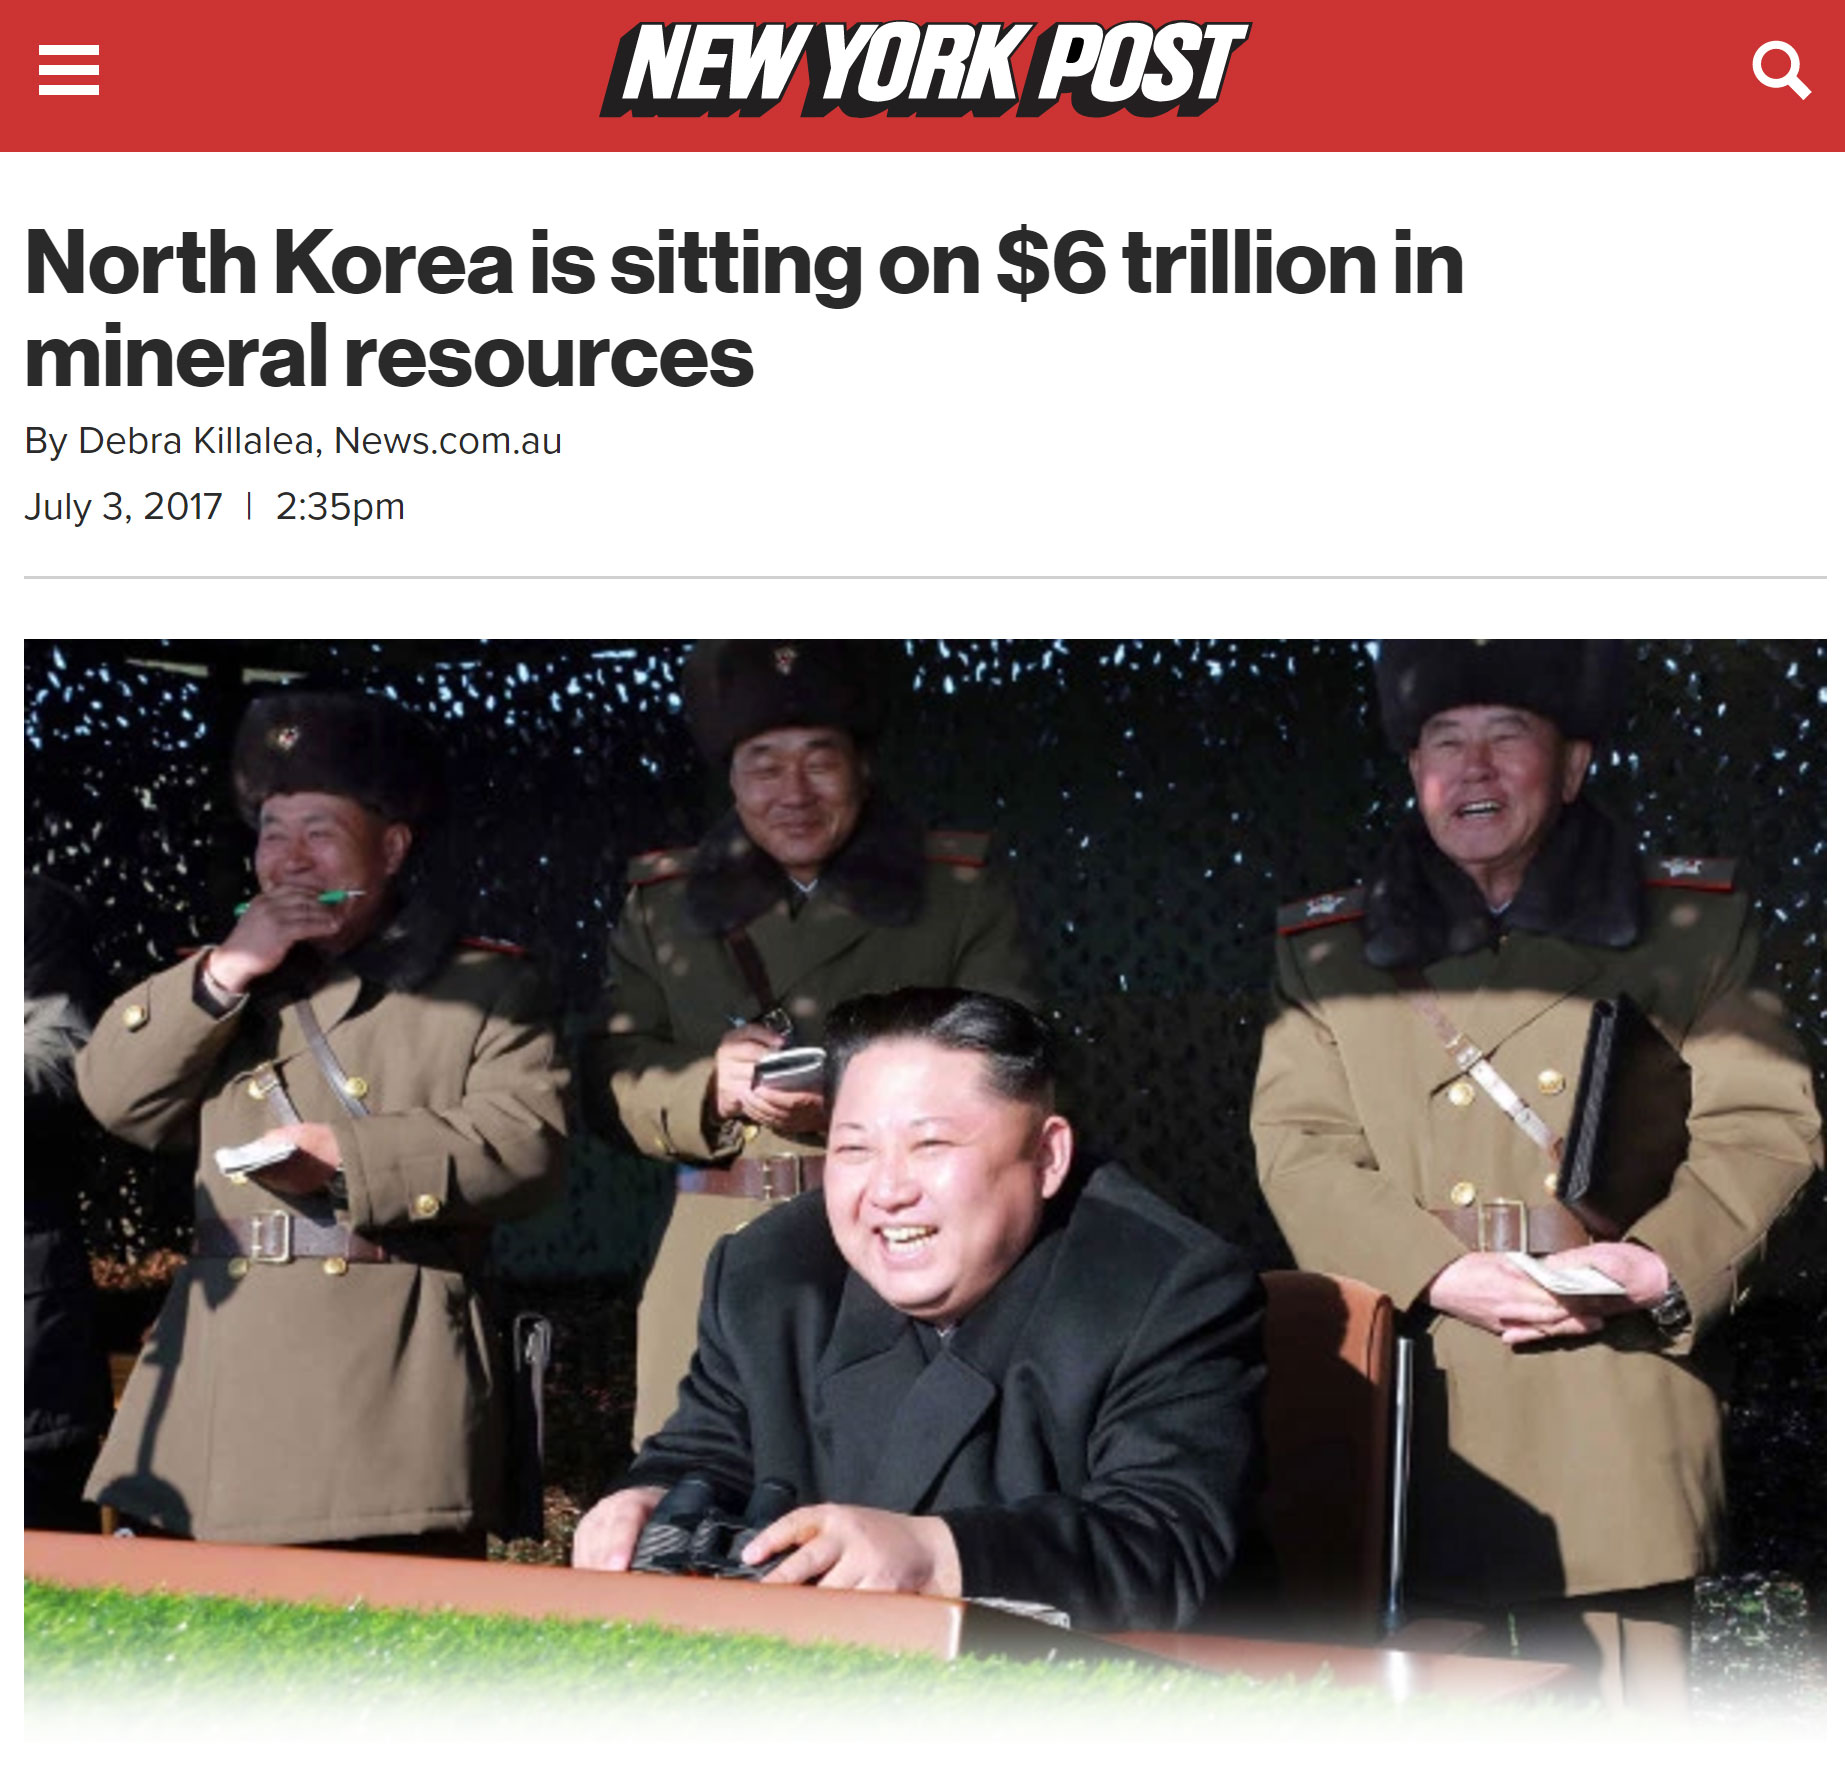 11-North-Korea-is-sitting-on-6-trillion-in-mineral-resources.jpg